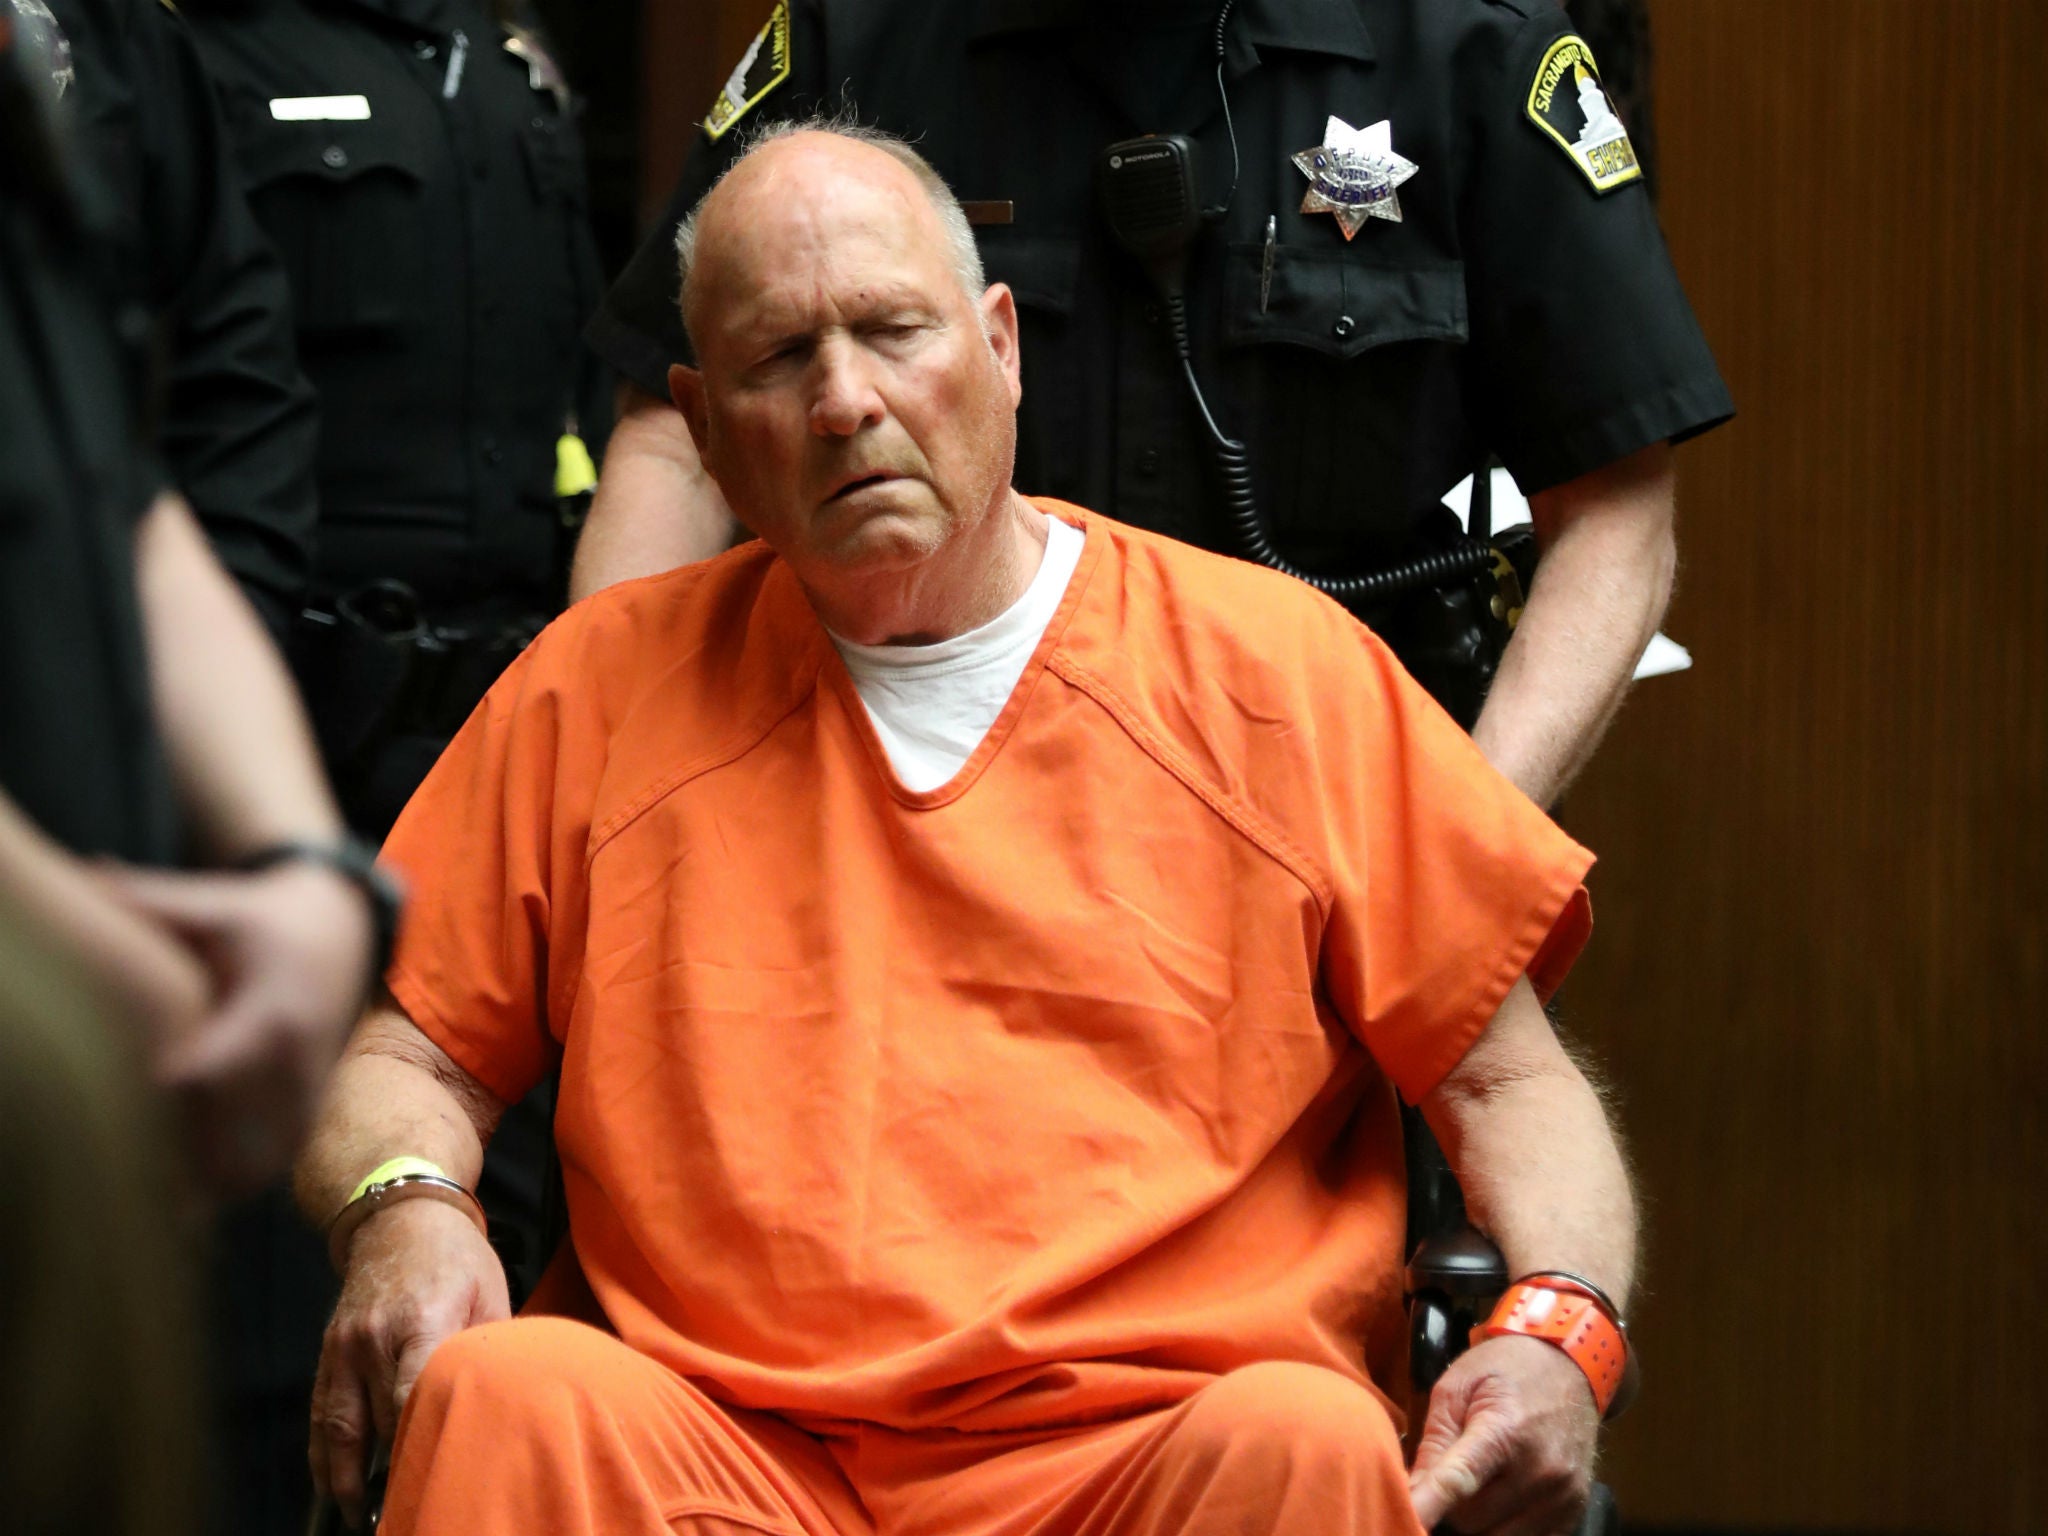 Joseph James DeAngelo, whom police suspect of being the Golden State Killer, has been arrested and charged with multiple murders